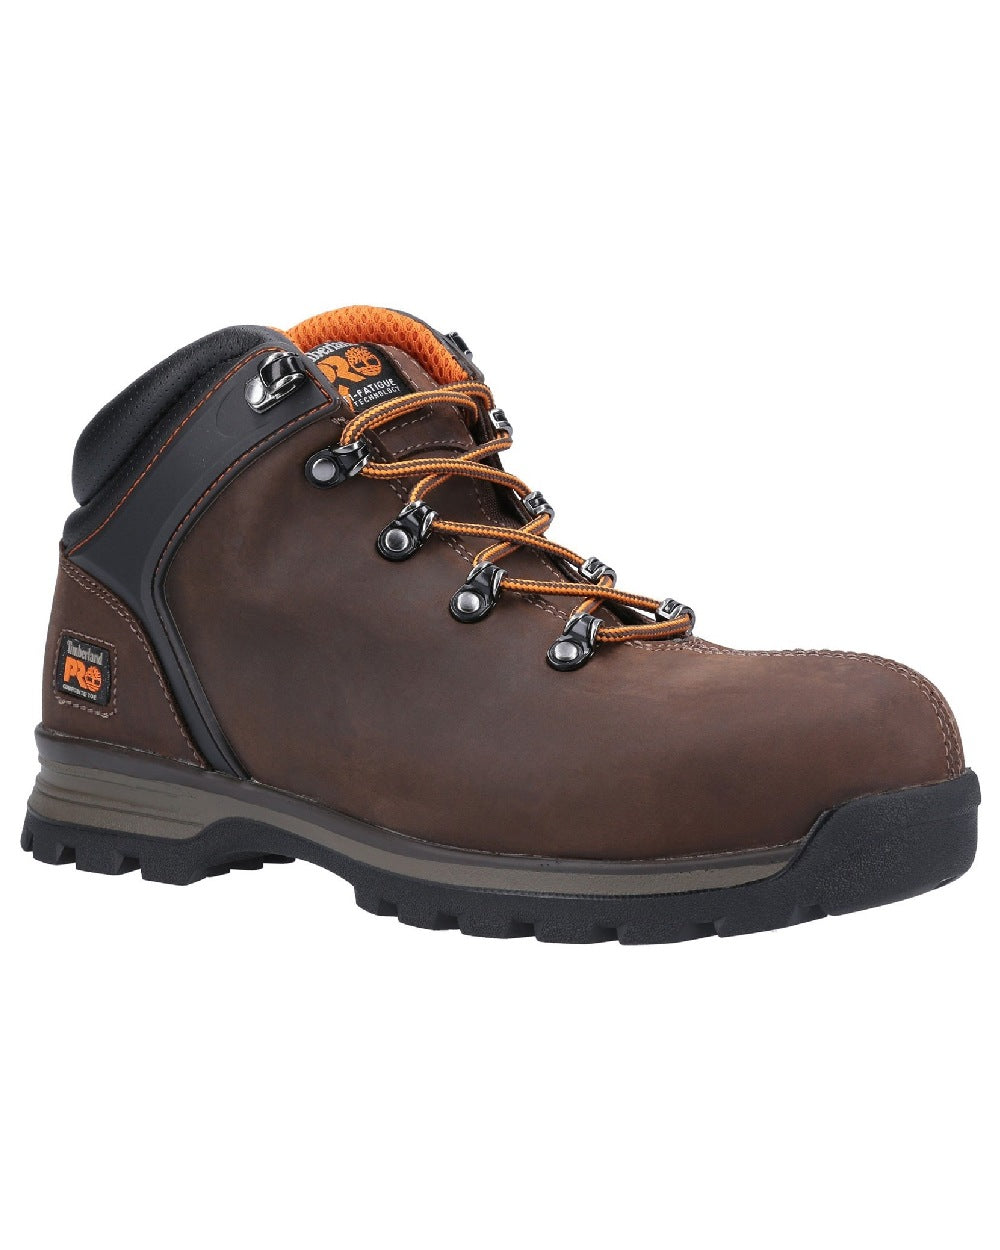 Brown coloured Timberland Pro Splitrock XT Composite Safety Toe Work Boots on white background 